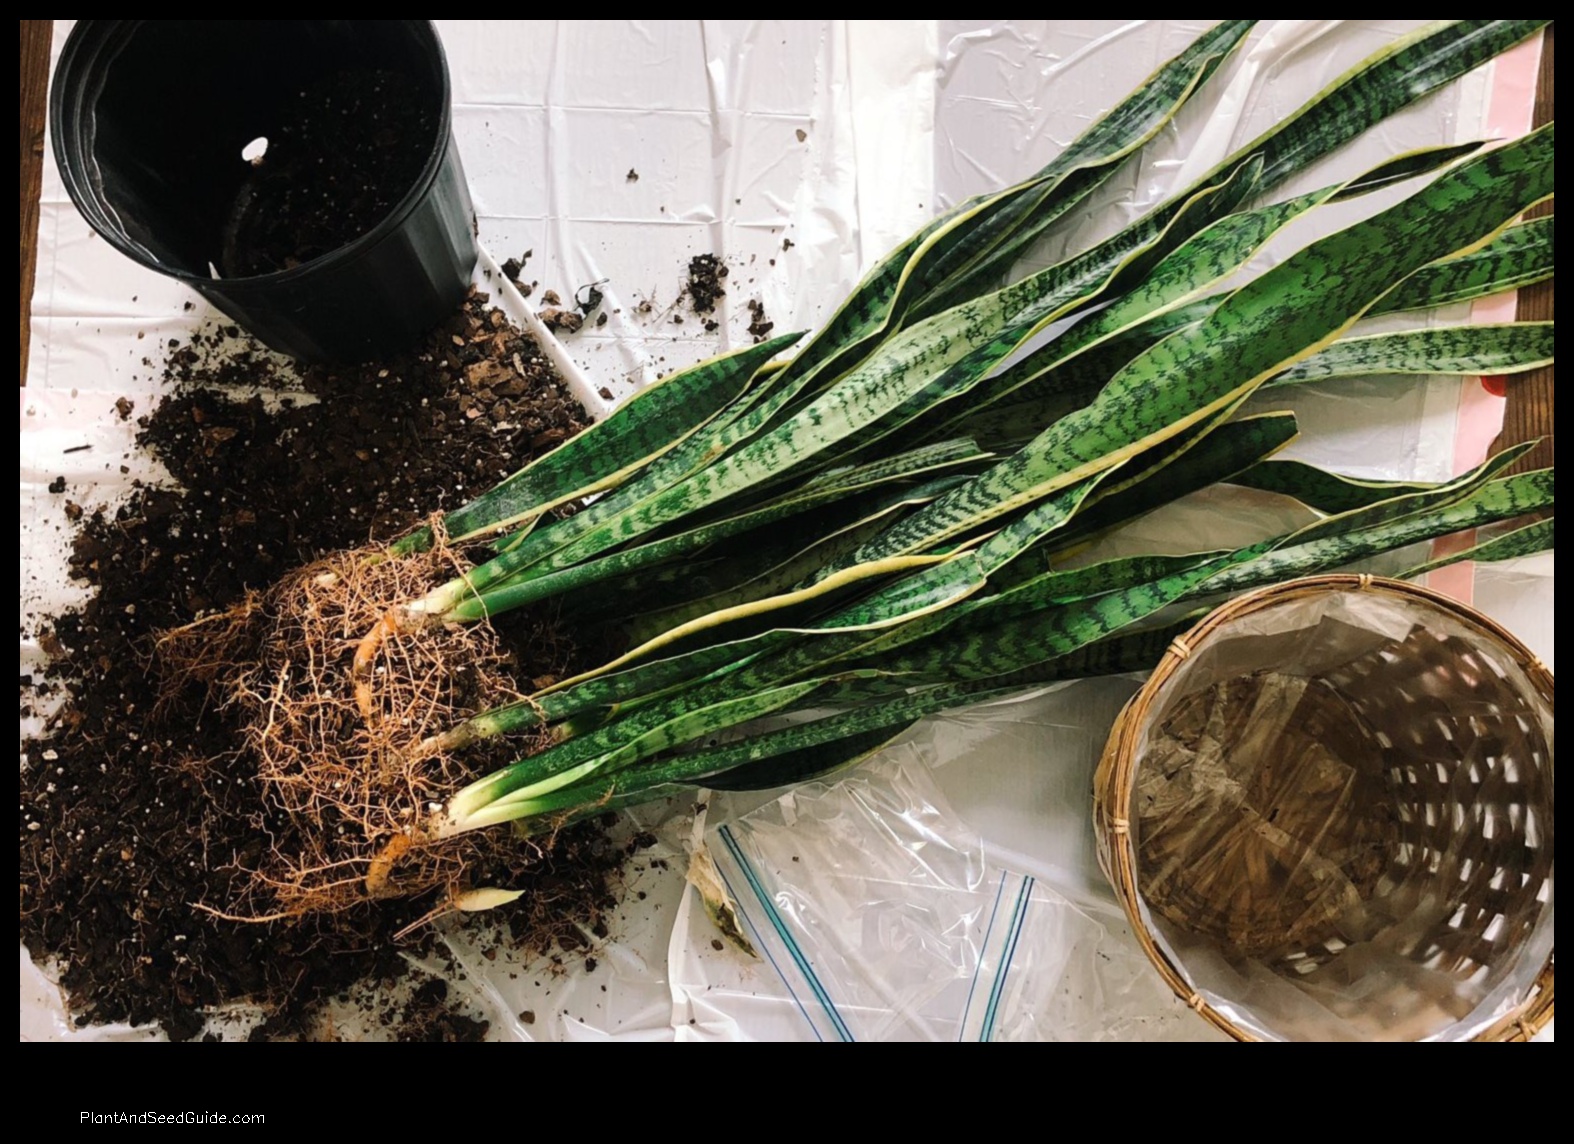 how to fix root rot snake plant